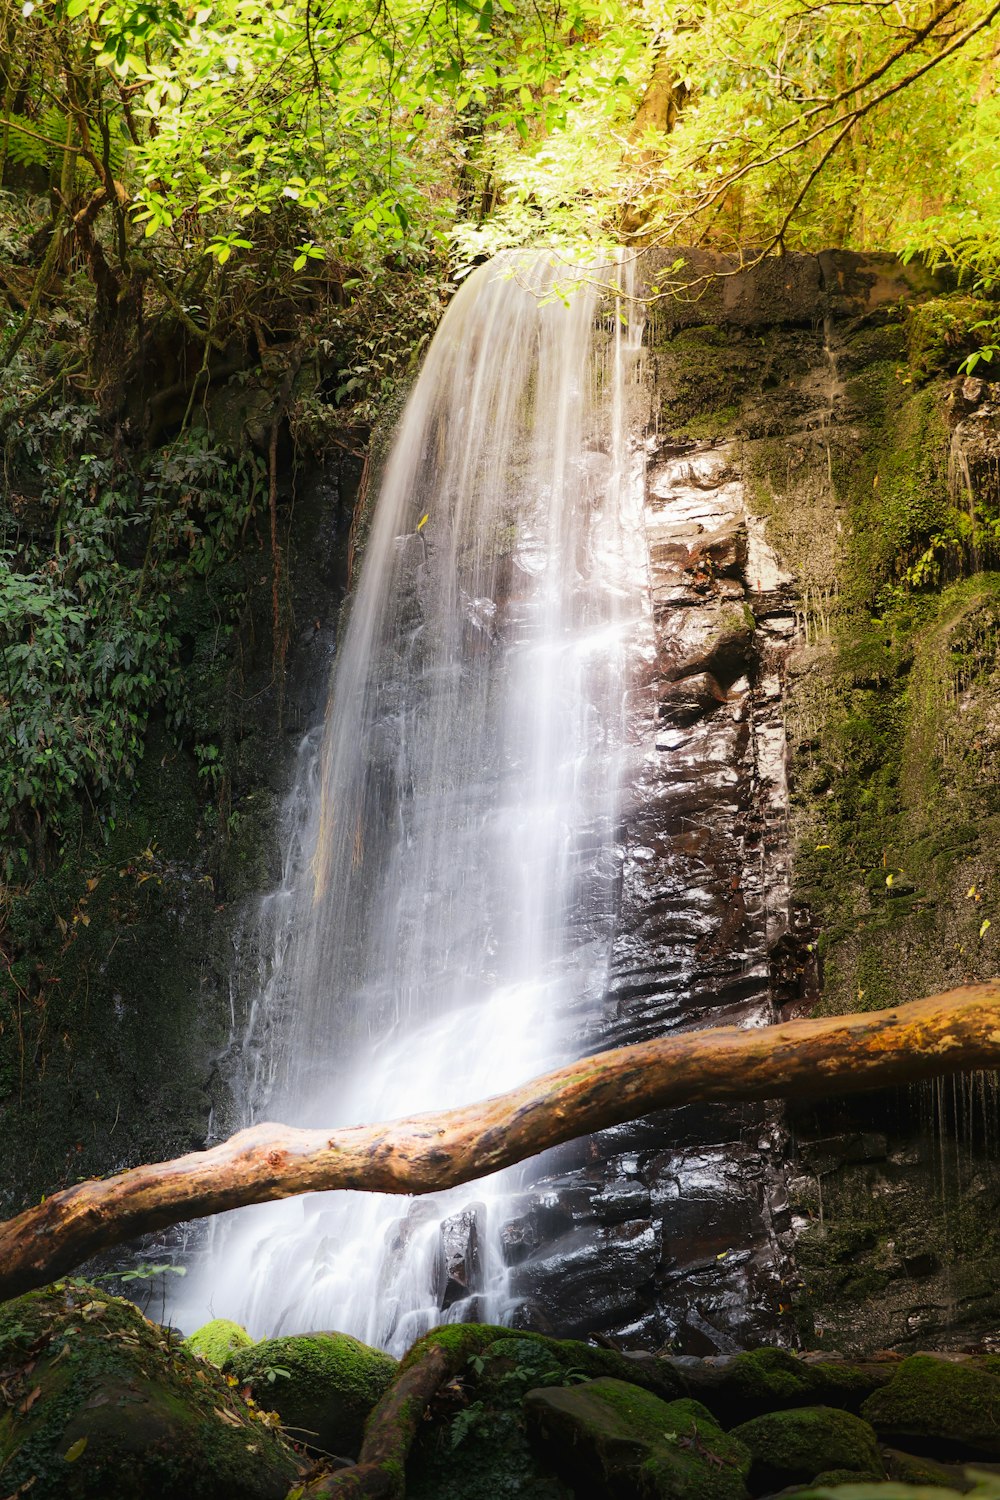 a waterfall with a fallen log in the foreground